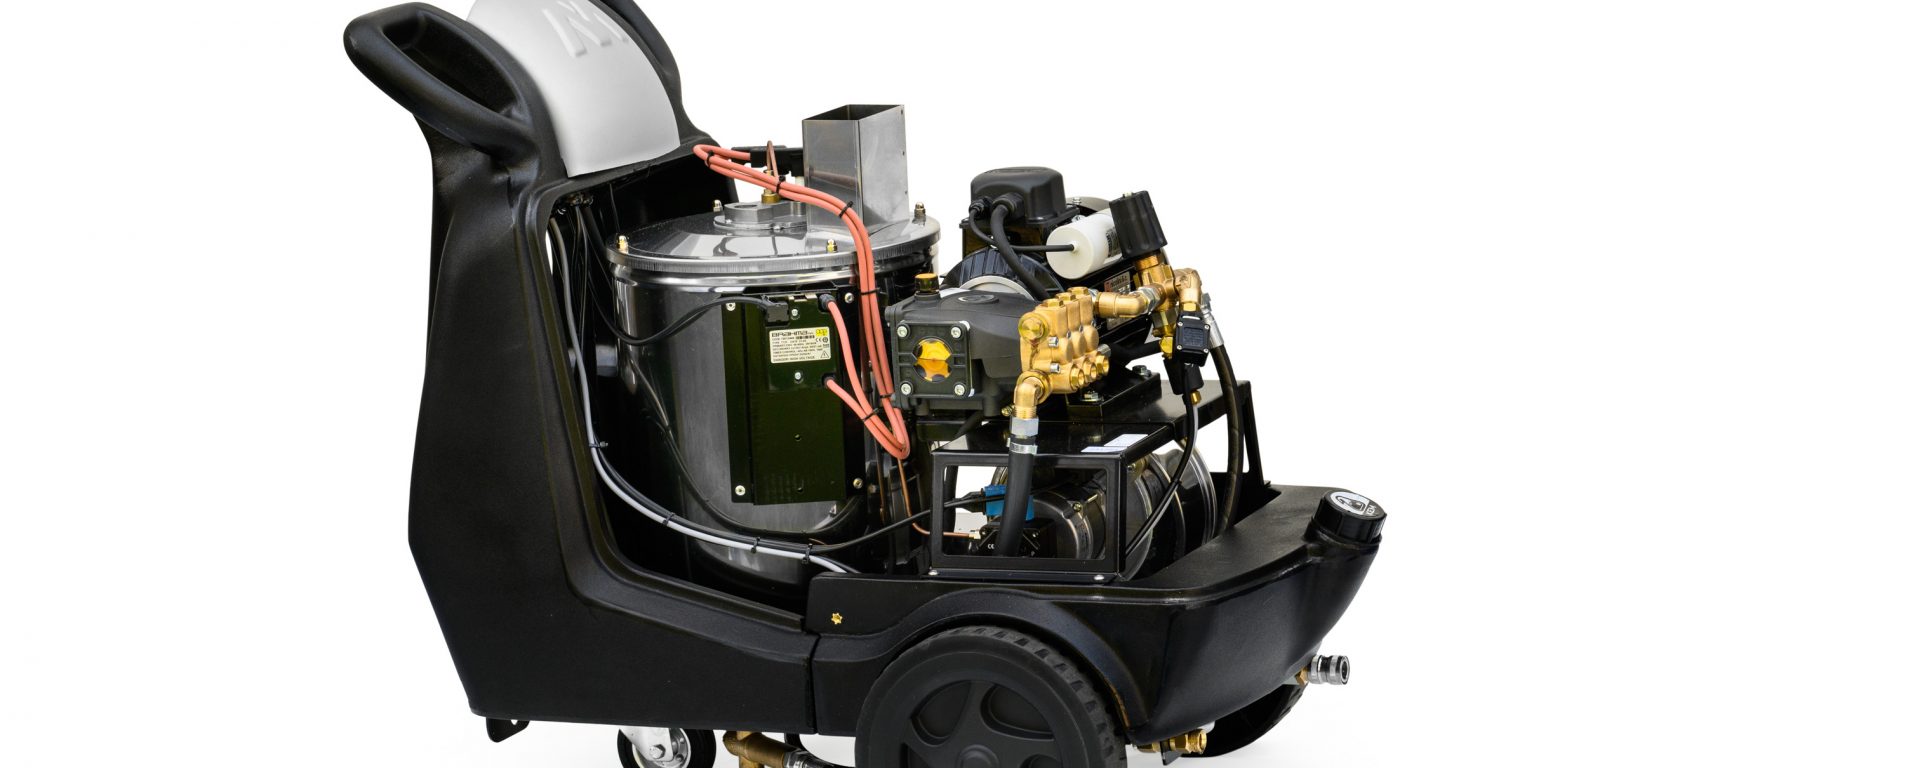 MAC International's Portable Pressure Washer - Unveiling Precision Engineering and Innovation